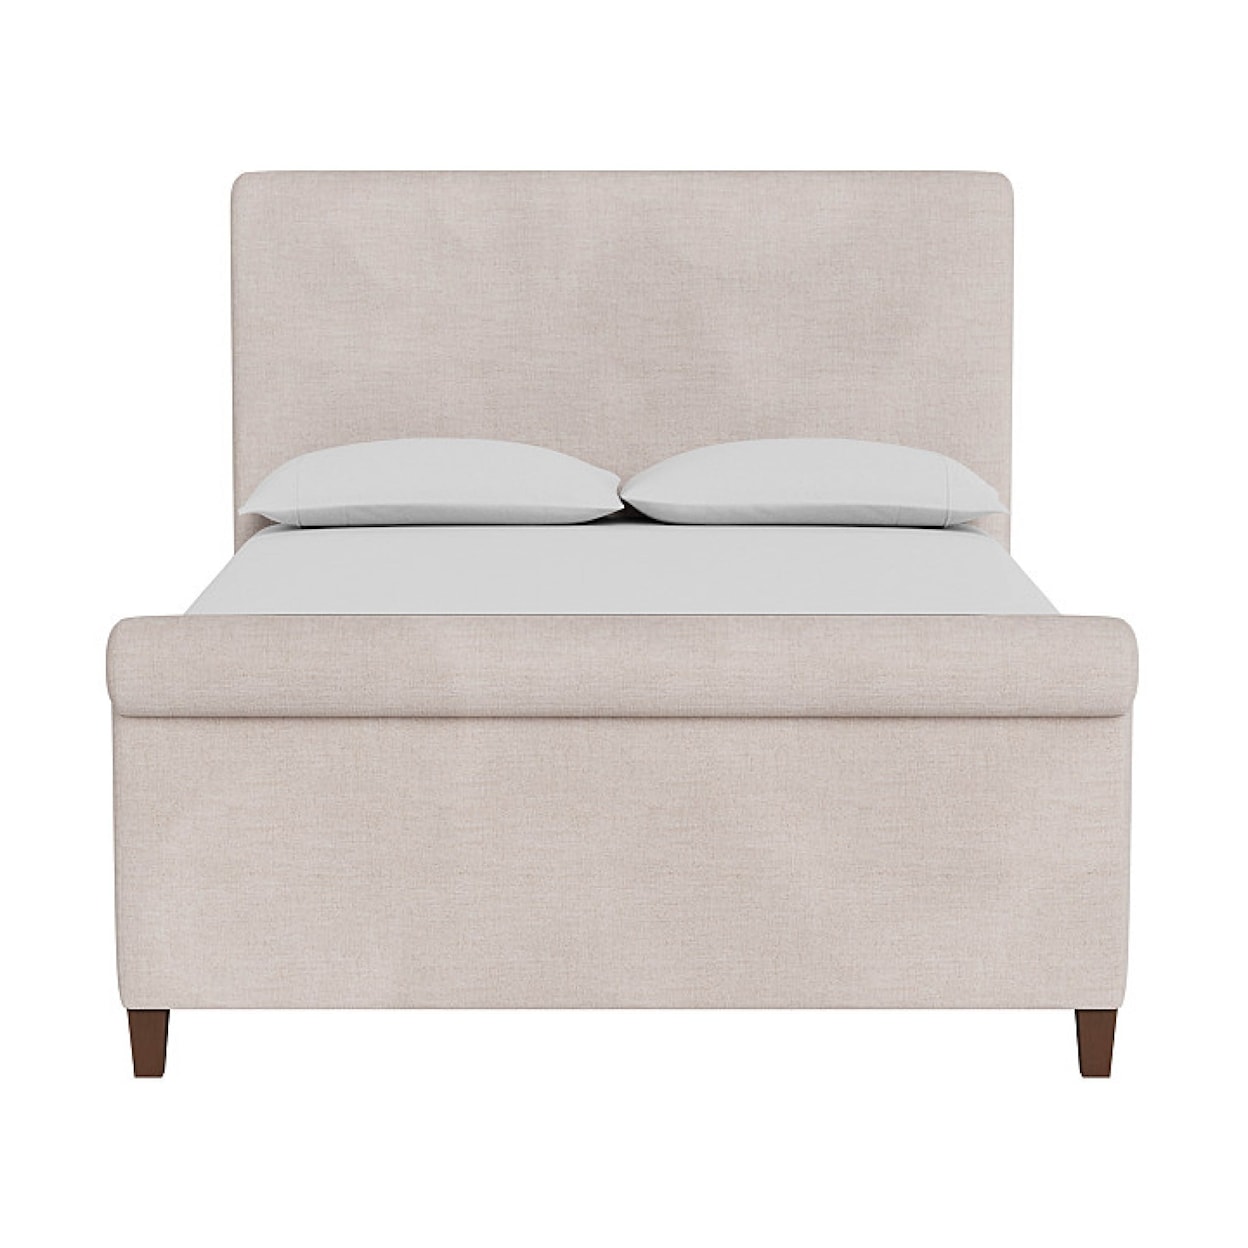 Universal UO Twin Cape May Bed